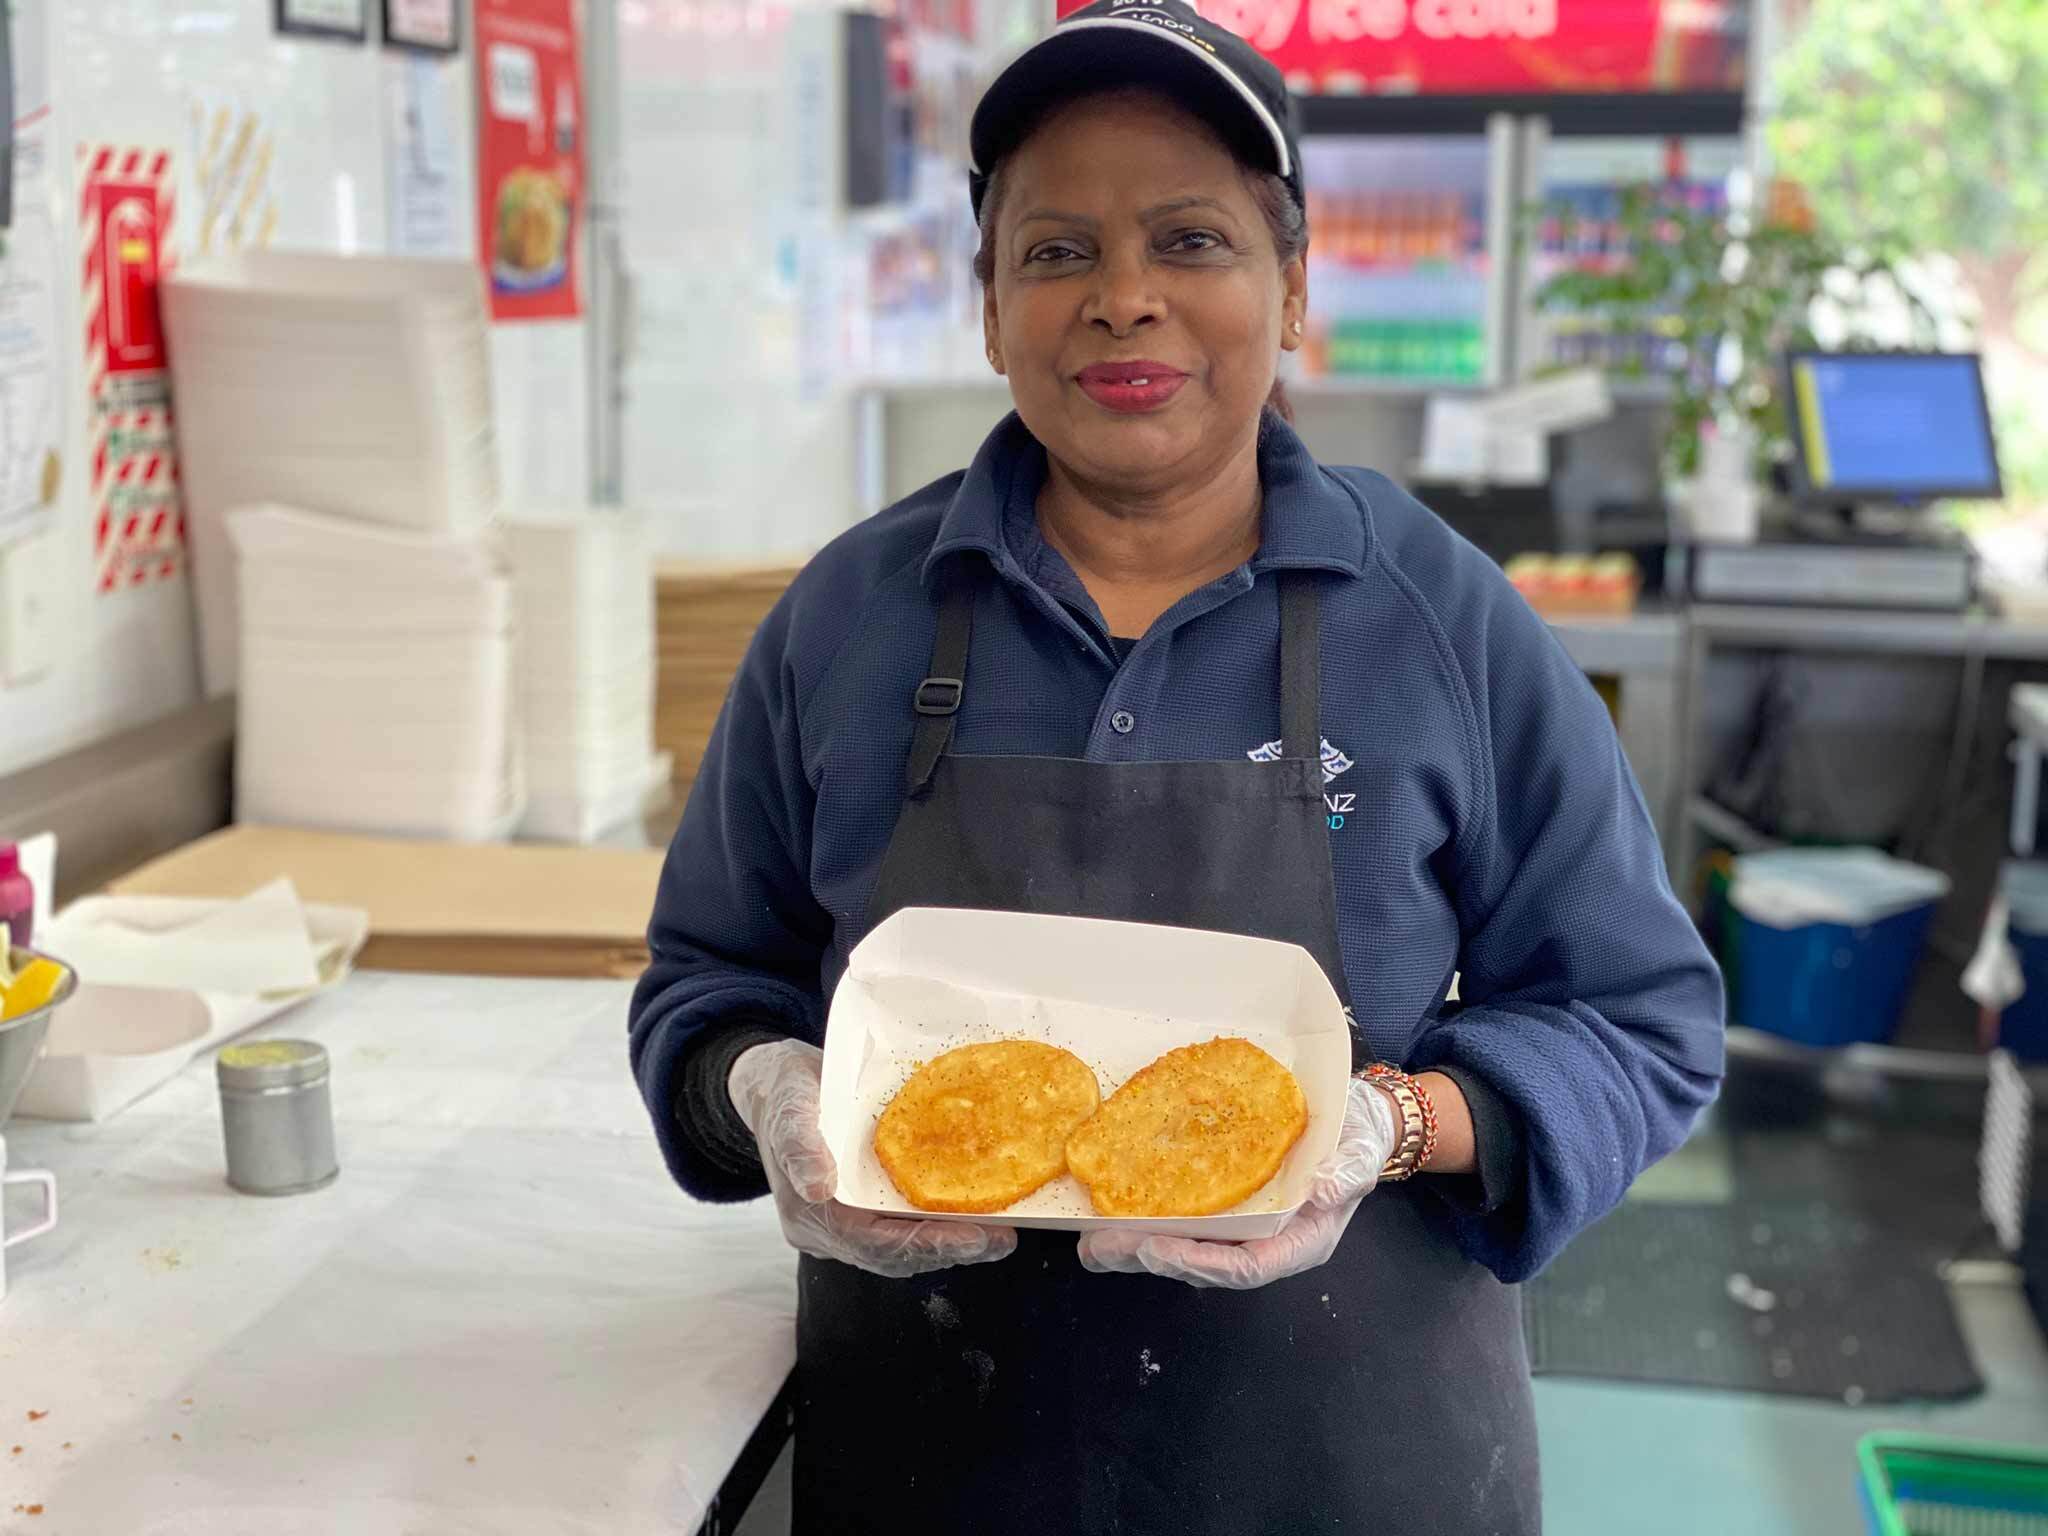 Photo of a woman in a restaurant kitchen holding a cardboard tray with two potato fritters in it.